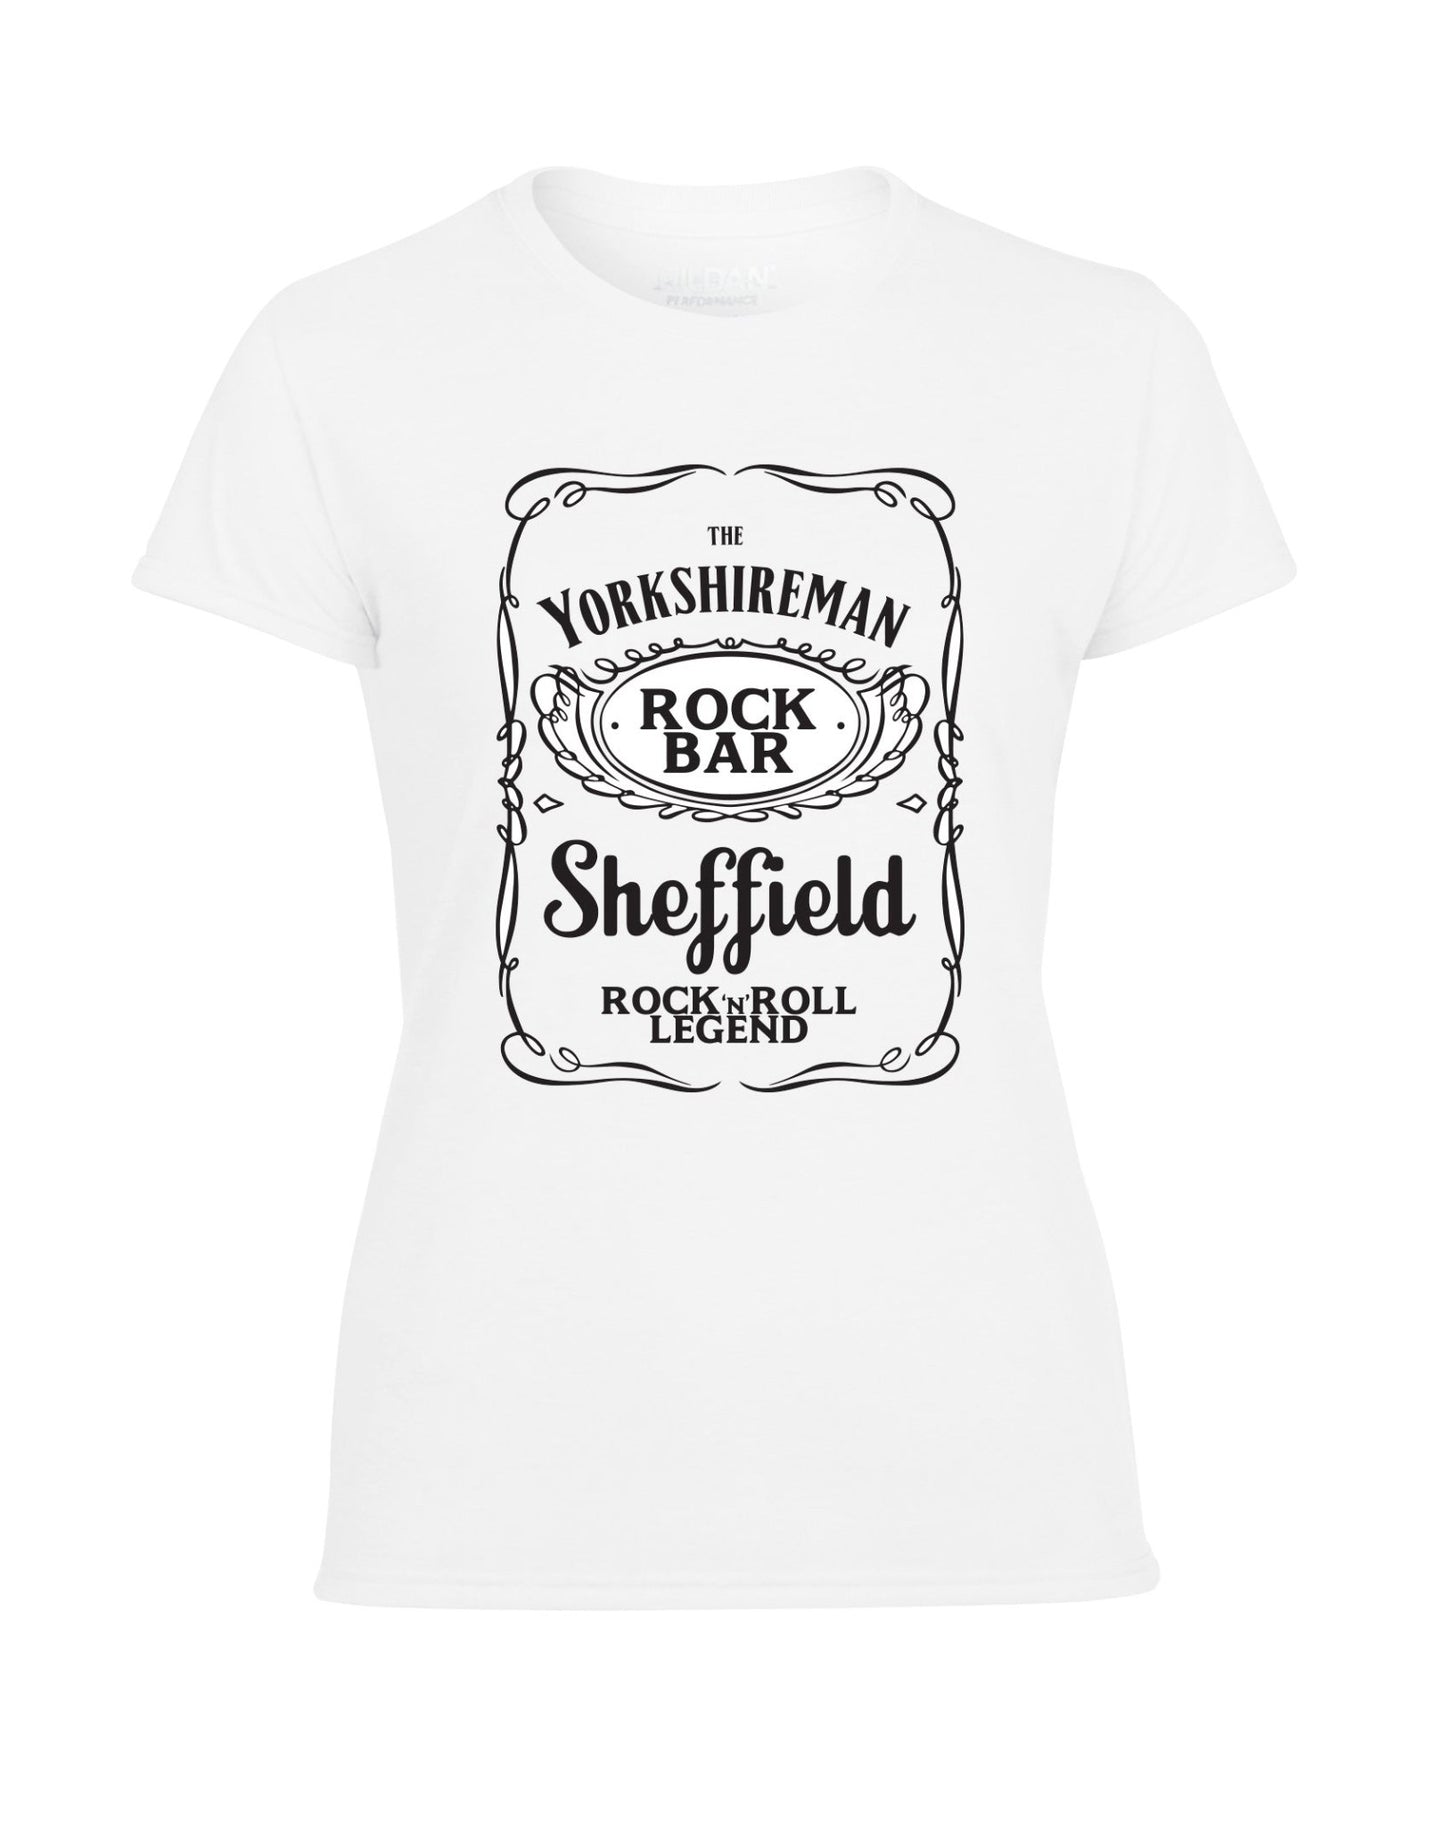 Yorkshireman ladies fit T-shirt - various colours - Dirty Stop Outs